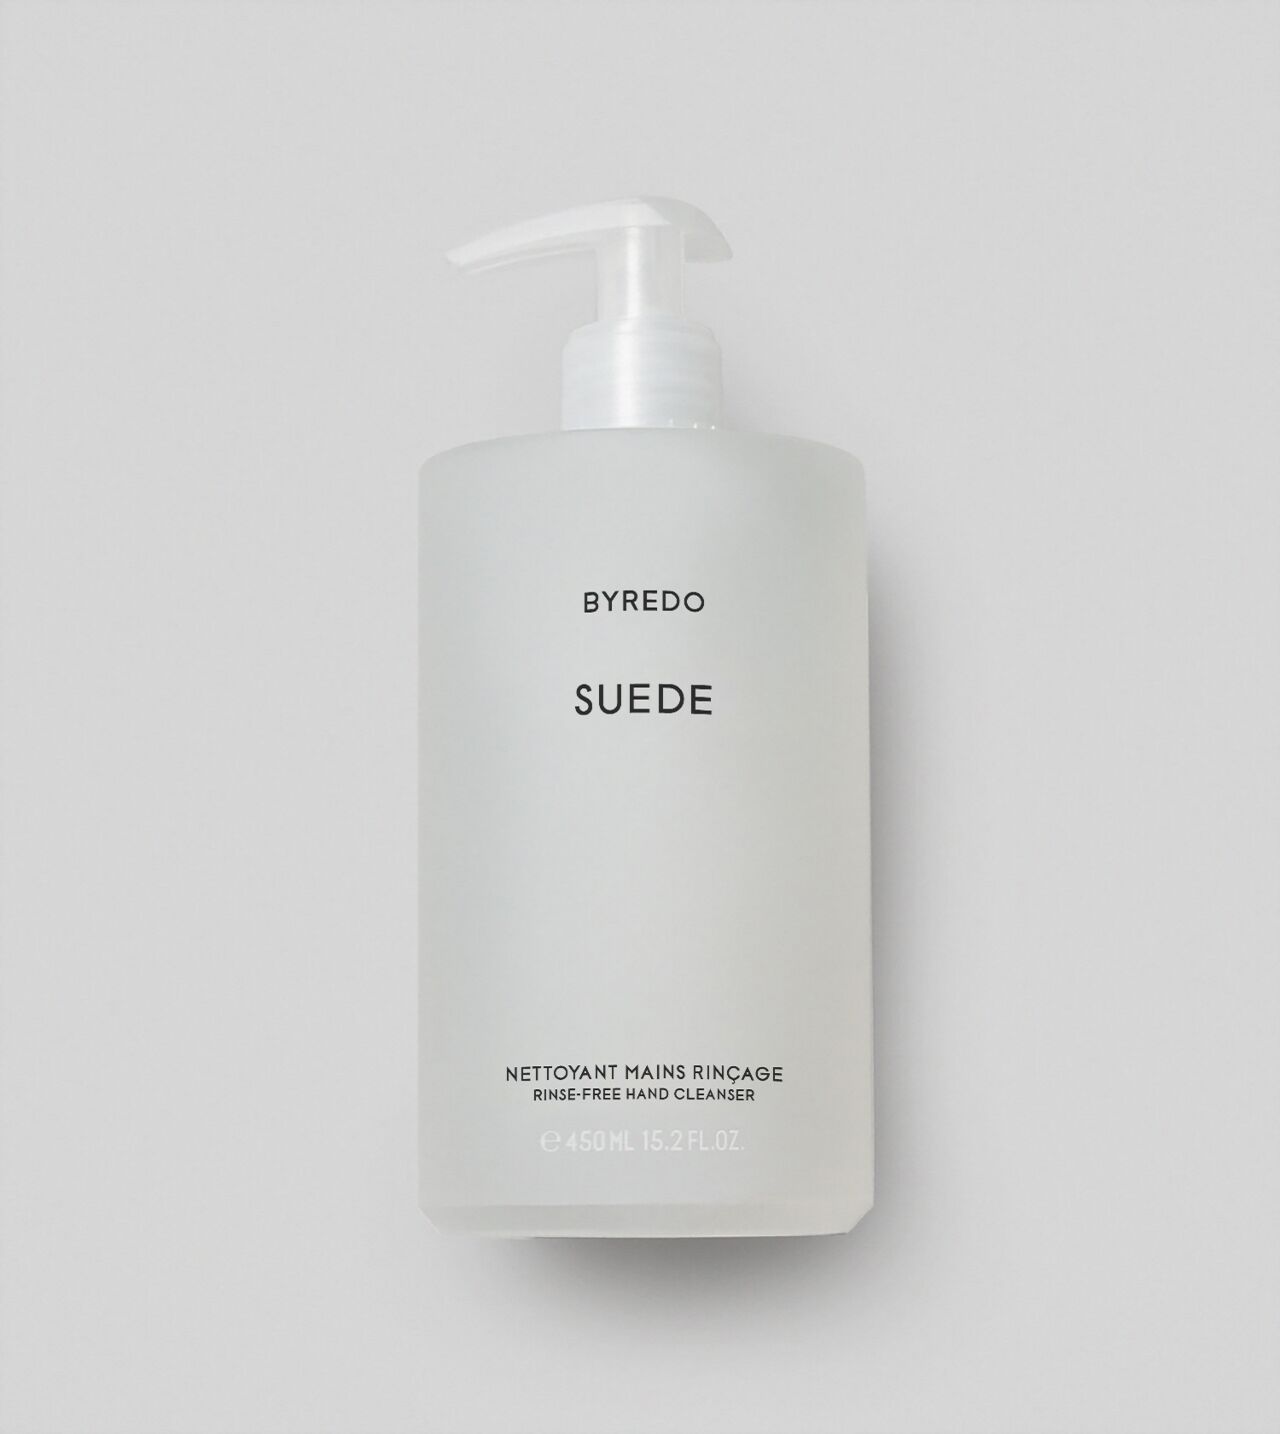 Suede Rinse-free hand cleanser